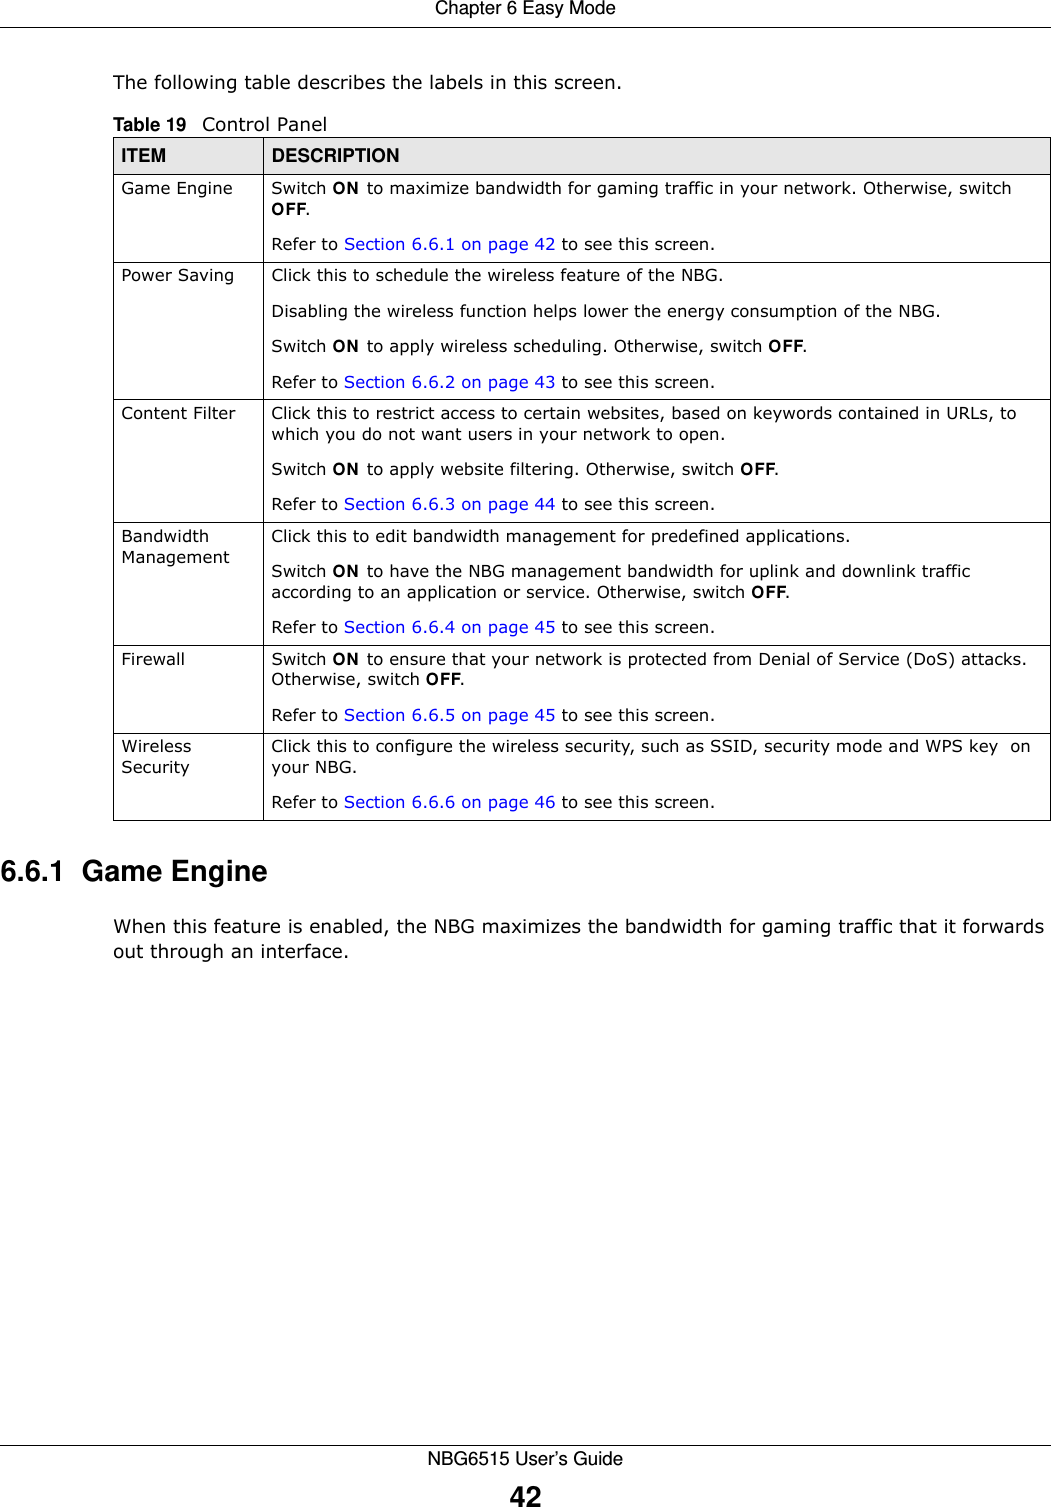 Chapter 6 Easy ModeNBG6515 User’s Guide42The following table describes the labels in this screen. 6.6.1  Game EngineWhen this feature is enabled, the NBG maximizes the bandwidth for gaming traffic that it forwards out through an interface.Table 19   Control PanelITEM DESCRIPTIONGame Engine Switch ON to maximize bandwidth for gaming traffic in your network. Otherwise, switch OFF.Refer to Section 6.6.1 on page 42 to see this screen.Power Saving Click this to schedule the wireless feature of the NBG. Disabling the wireless function helps lower the energy consumption of the NBG. Switch ON to apply wireless scheduling. Otherwise, switch OFF.Refer to Section 6.6.2 on page 43 to see this screen.Content Filter Click this to restrict access to certain websites, based on keywords contained in URLs, to which you do not want users in your network to open. Switch ON to apply website filtering. Otherwise, switch OFF.Refer to Section 6.6.3 on page 44 to see this screen.Bandwidth ManagementClick this to edit bandwidth management for predefined applications. Switch ON to have the NBG management bandwidth for uplink and downlink traffic according to an application or service. Otherwise, switch OFF.Refer to Section 6.6.4 on page 45 to see this screen.Firewall Switch ON to ensure that your network is protected from Denial of Service (DoS) attacks. Otherwise, switch OFF.Refer to Section 6.6.5 on page 45 to see this screen.Wireless SecurityClick this to configure the wireless security, such as SSID, security mode and WPS key  on your NBG.  Refer to Section 6.6.6 on page 46 to see this screen.